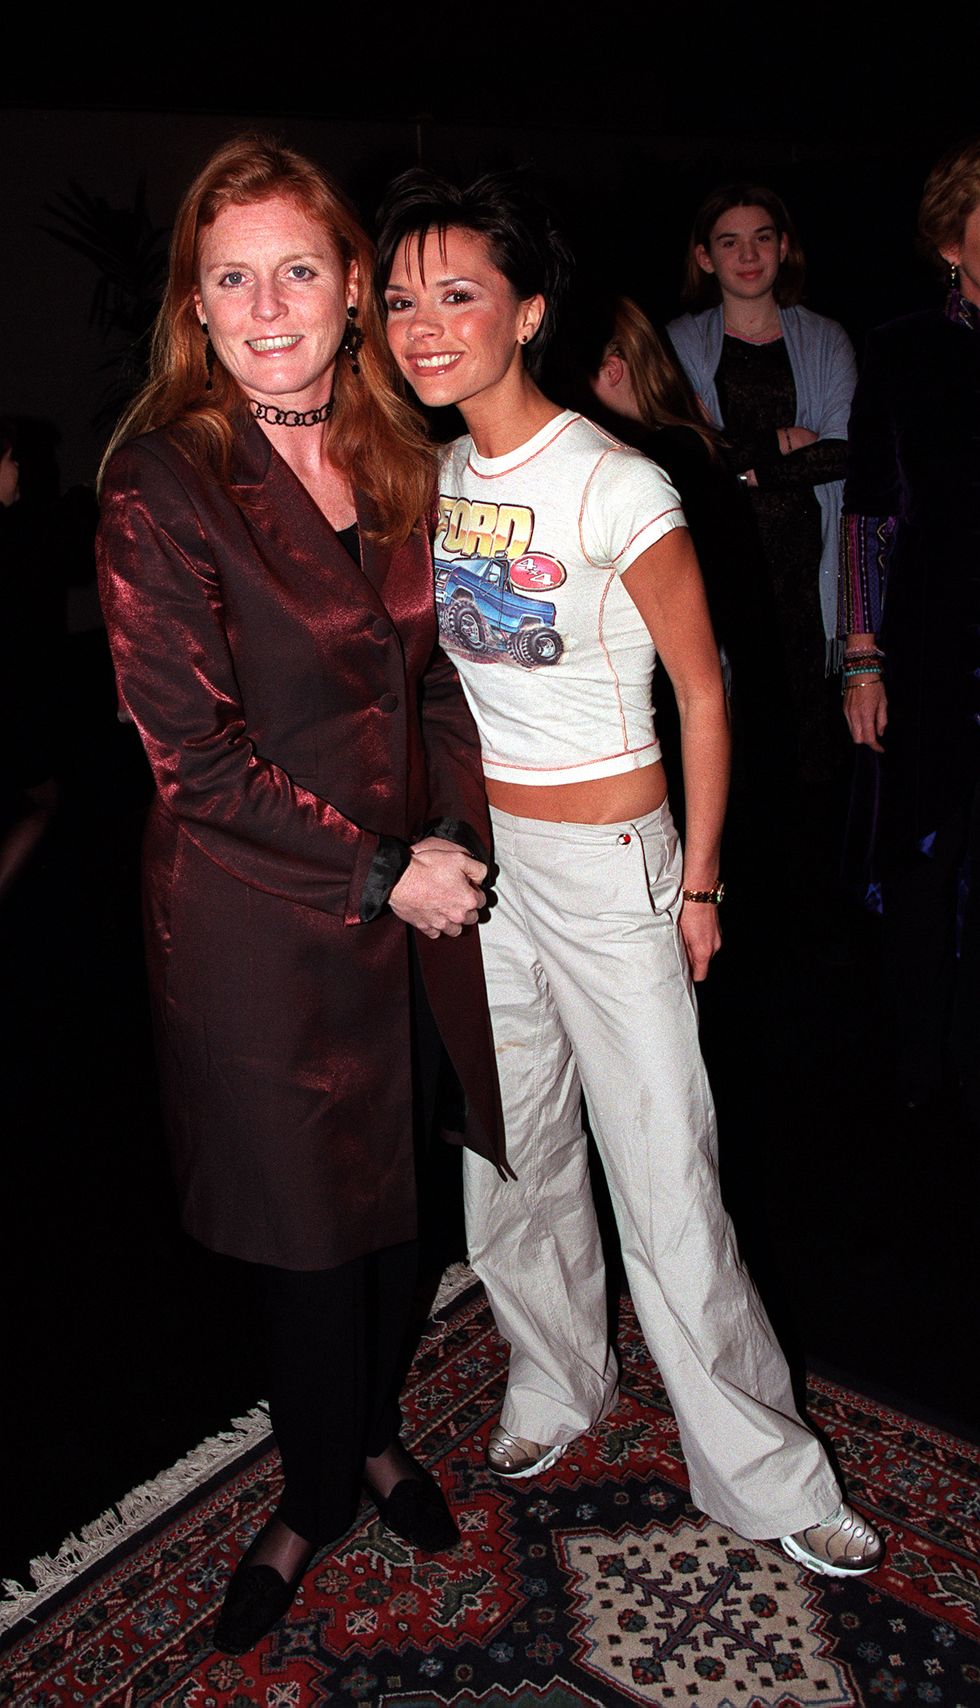 the duchess of york and victoria beckham backstage at earls court